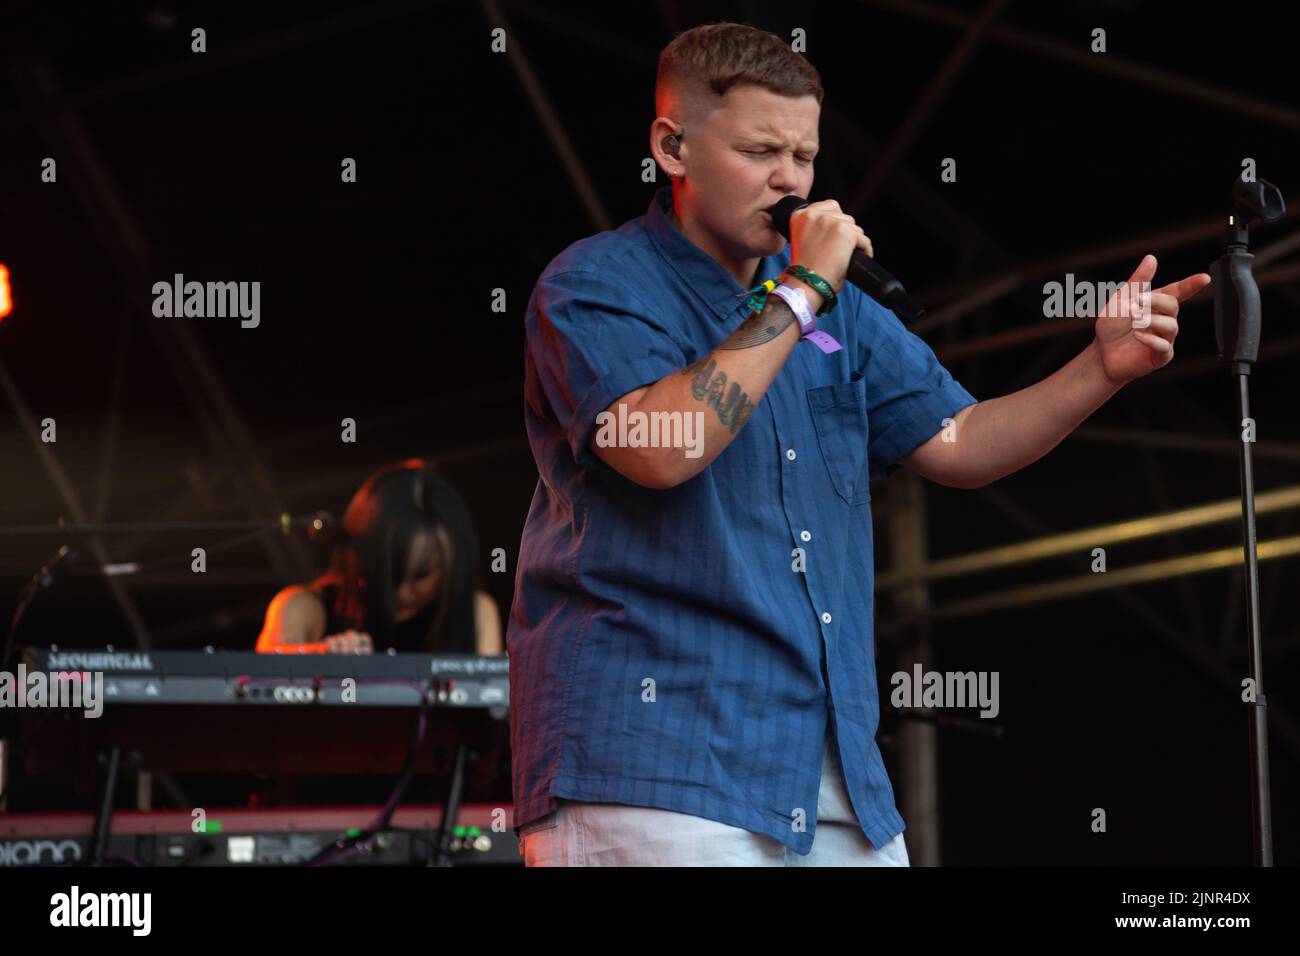 Boomtown Festival, Winchester, UK 12 August 2022 Kae Tempsest performs on Grand Central at Boomtown 2022 Credit: Denise Laura Baker/Alamy Live News Credit: Denise Laura Baker/Alamy Live News Stock Photo